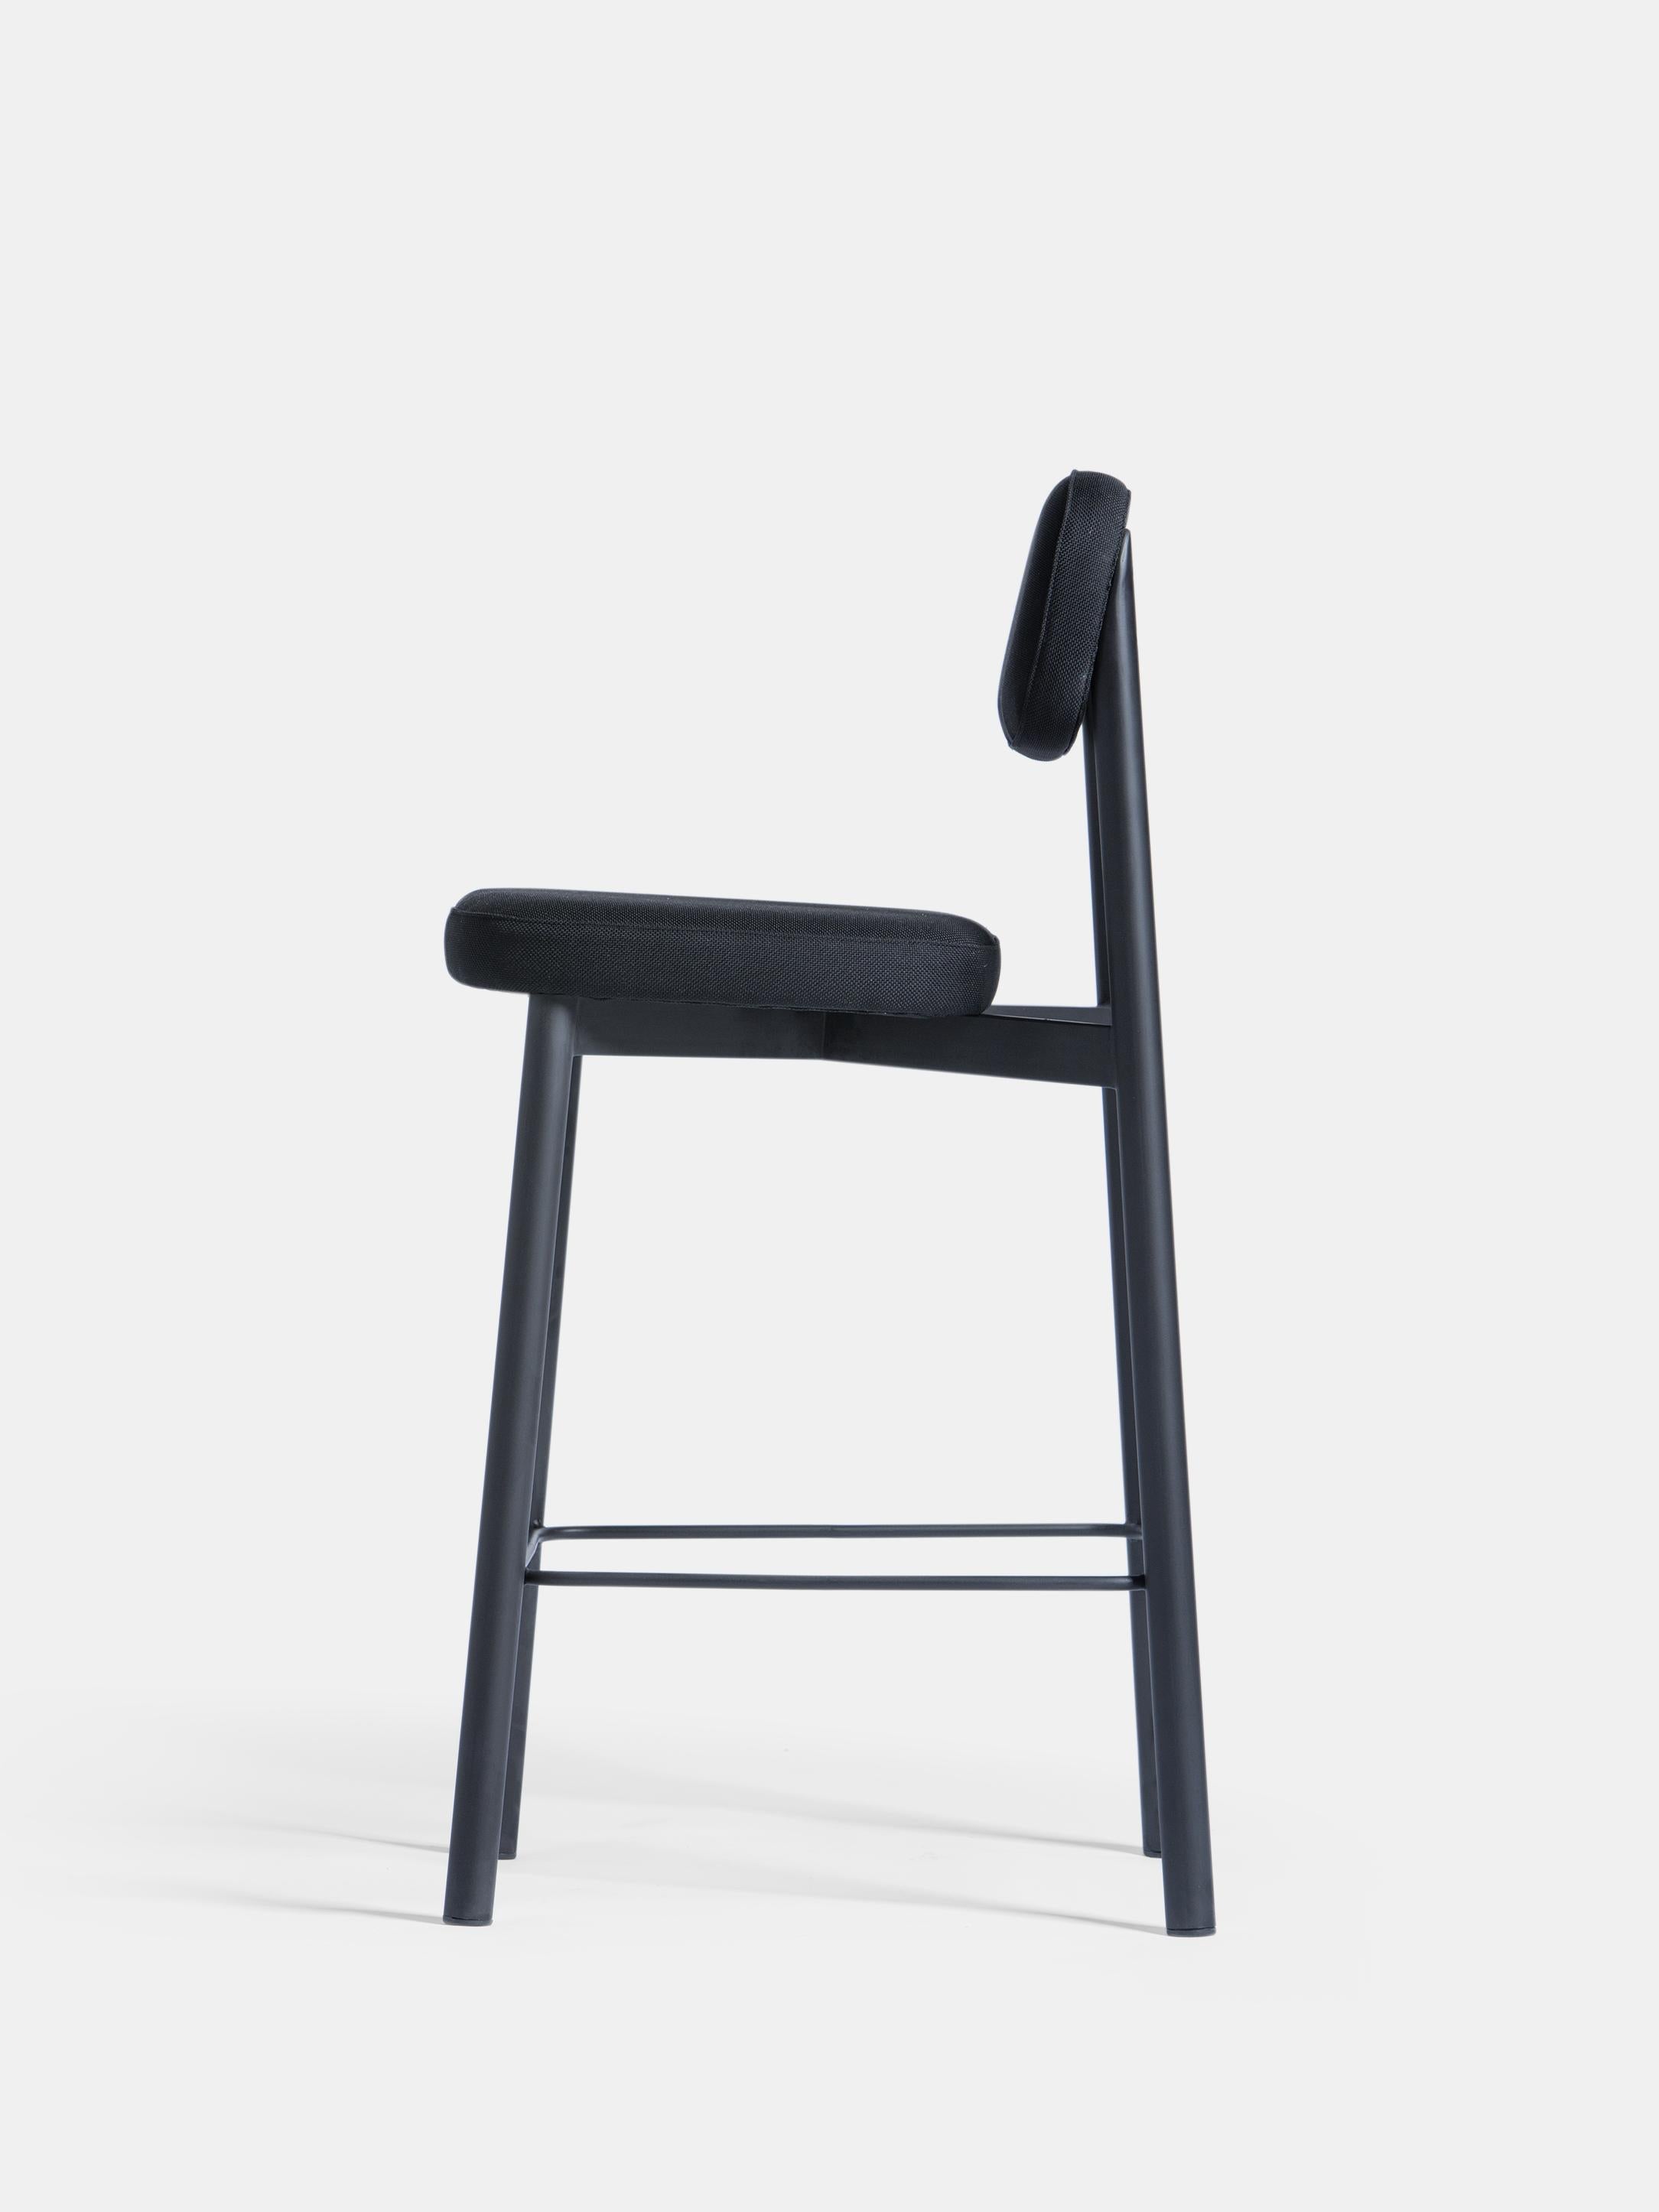 Set of 6 Black Residence 65 Counter Chairs by Kann Design
Dimensions: D 50 x W 46 x H 93 cm.
Materials: Steel tube, HR foam, fabric upholstery Kvadrat Relate 191 (100% Trevira).
Available in other colors.

All of the Residence seats were created by